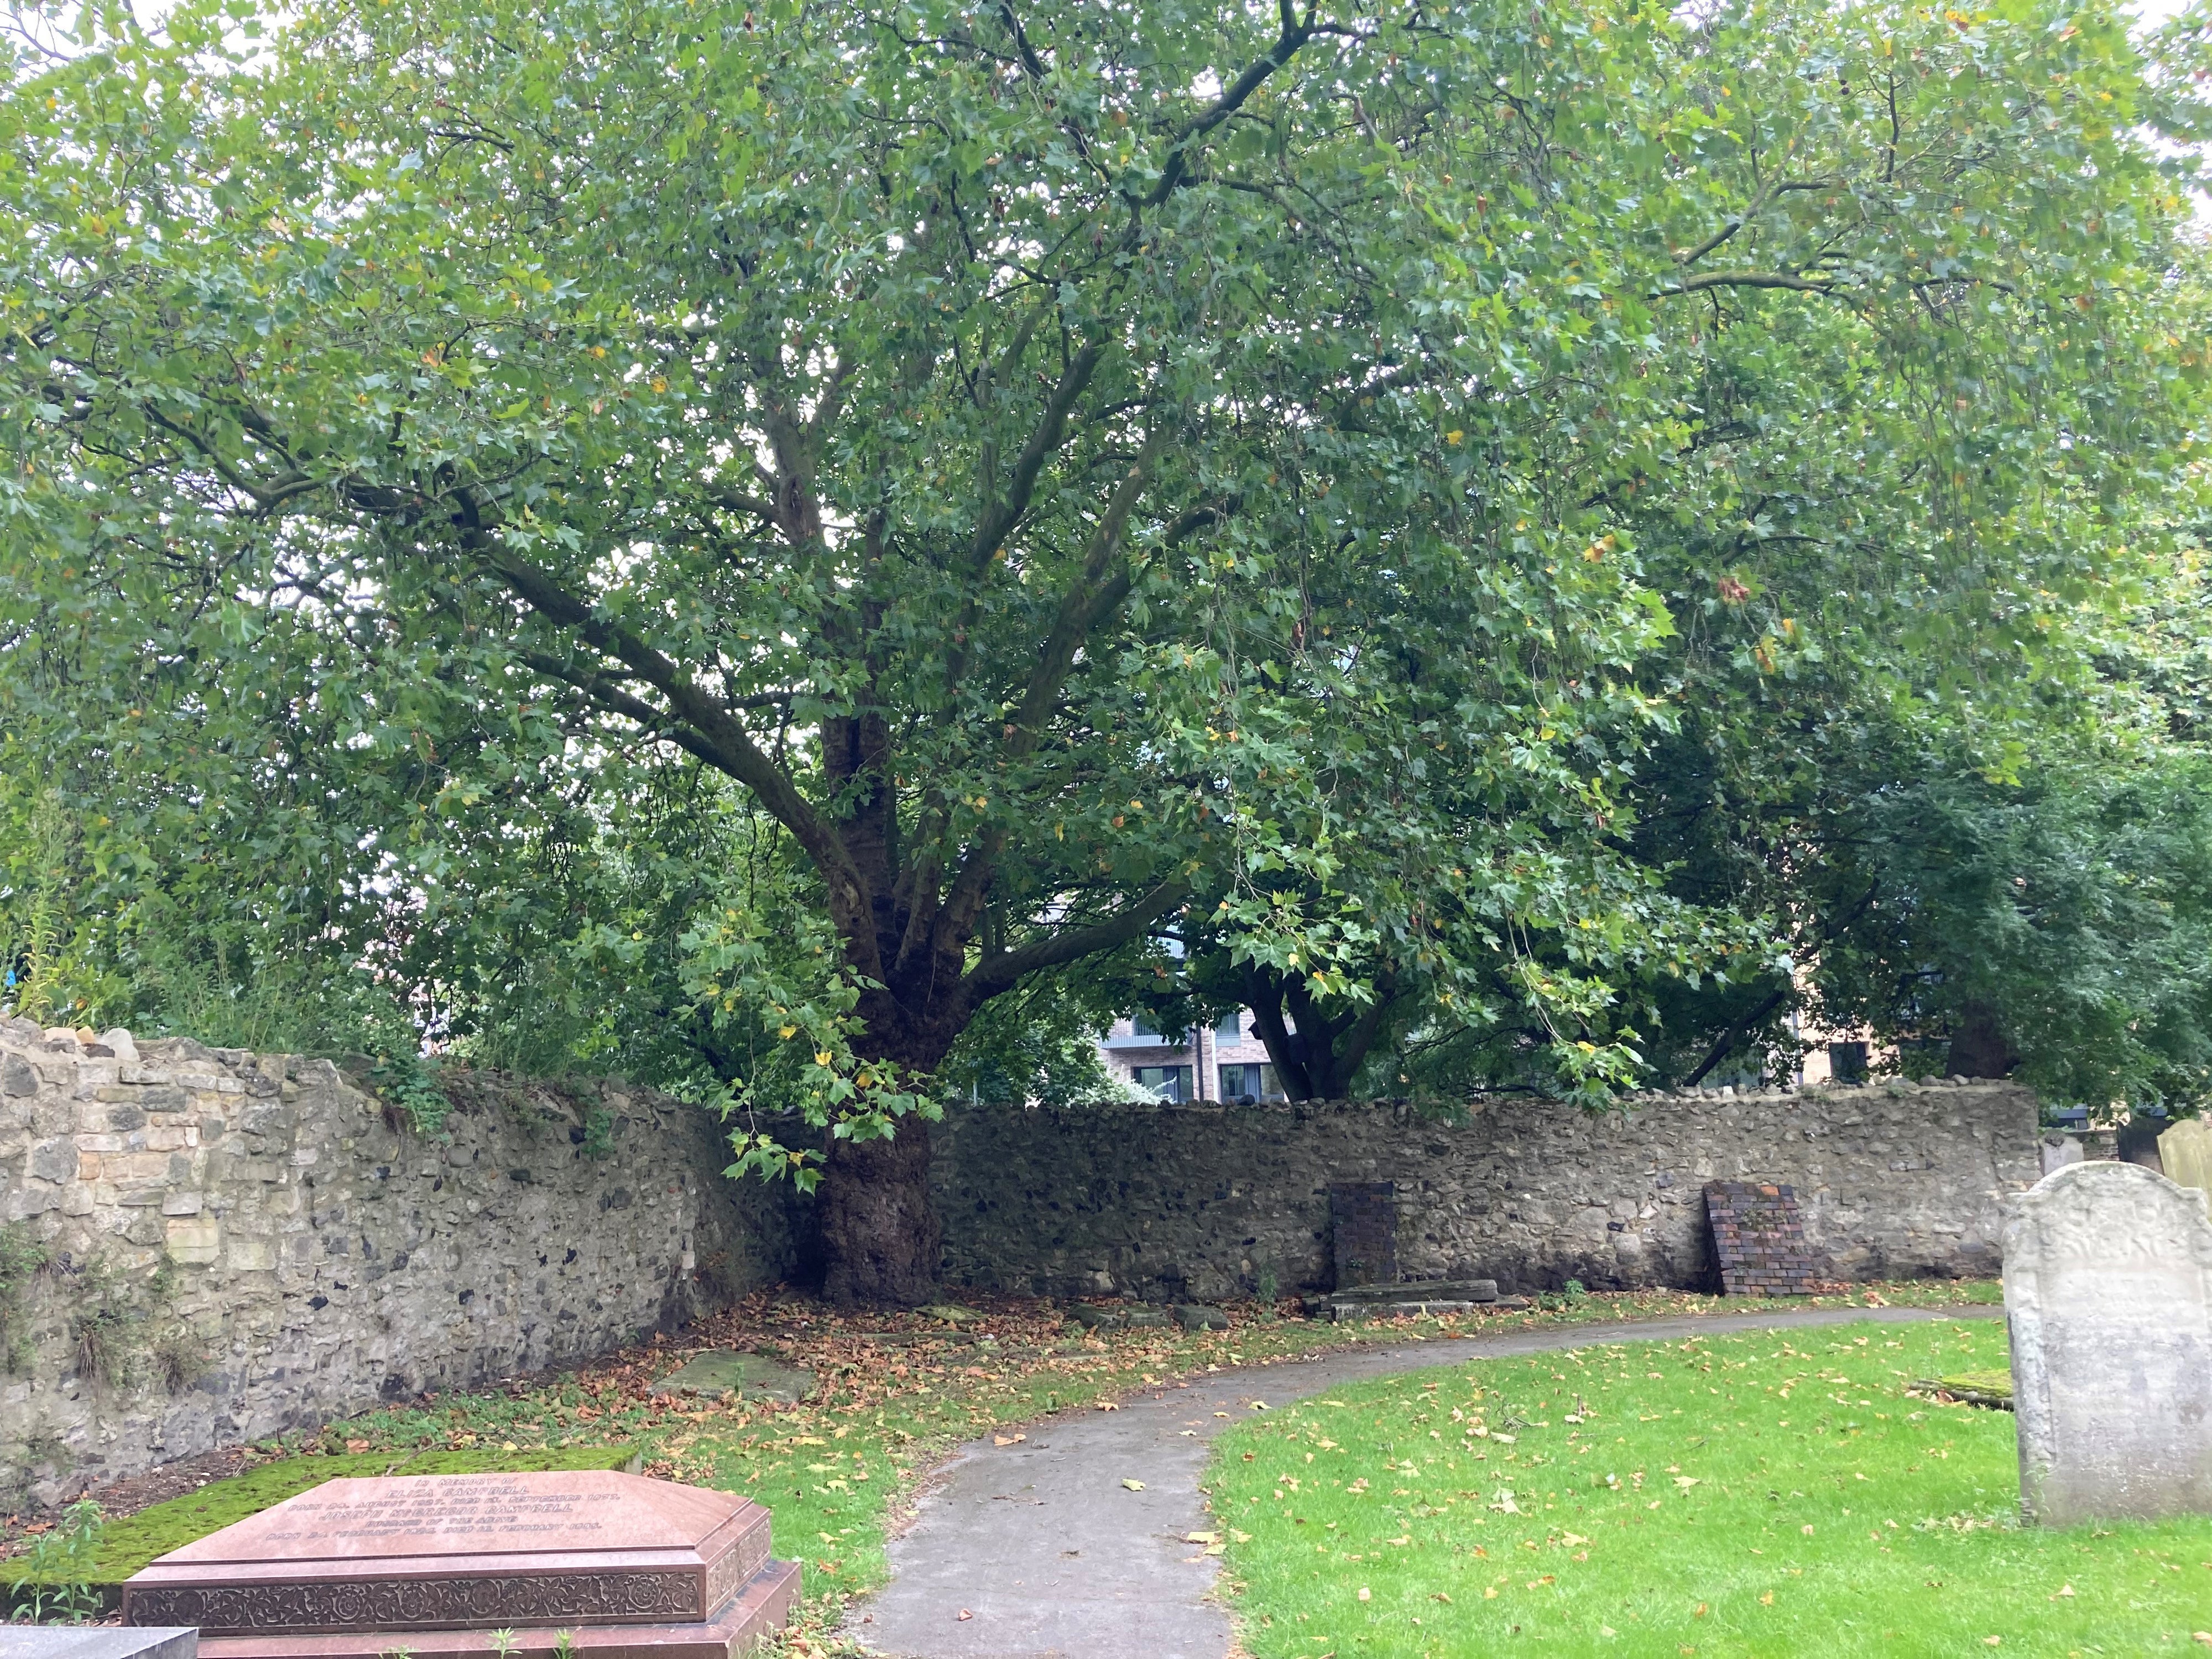 A large maple tree in a corner of the walled cemetery in St Margaret’s churchyard in Barking, east London, where the bodies of Gabriel Kovari, 22, and Daniel Whitworth, 21, were found dead by the same dog walker three weeks apart in 2014. (Emily Pennink/PA)